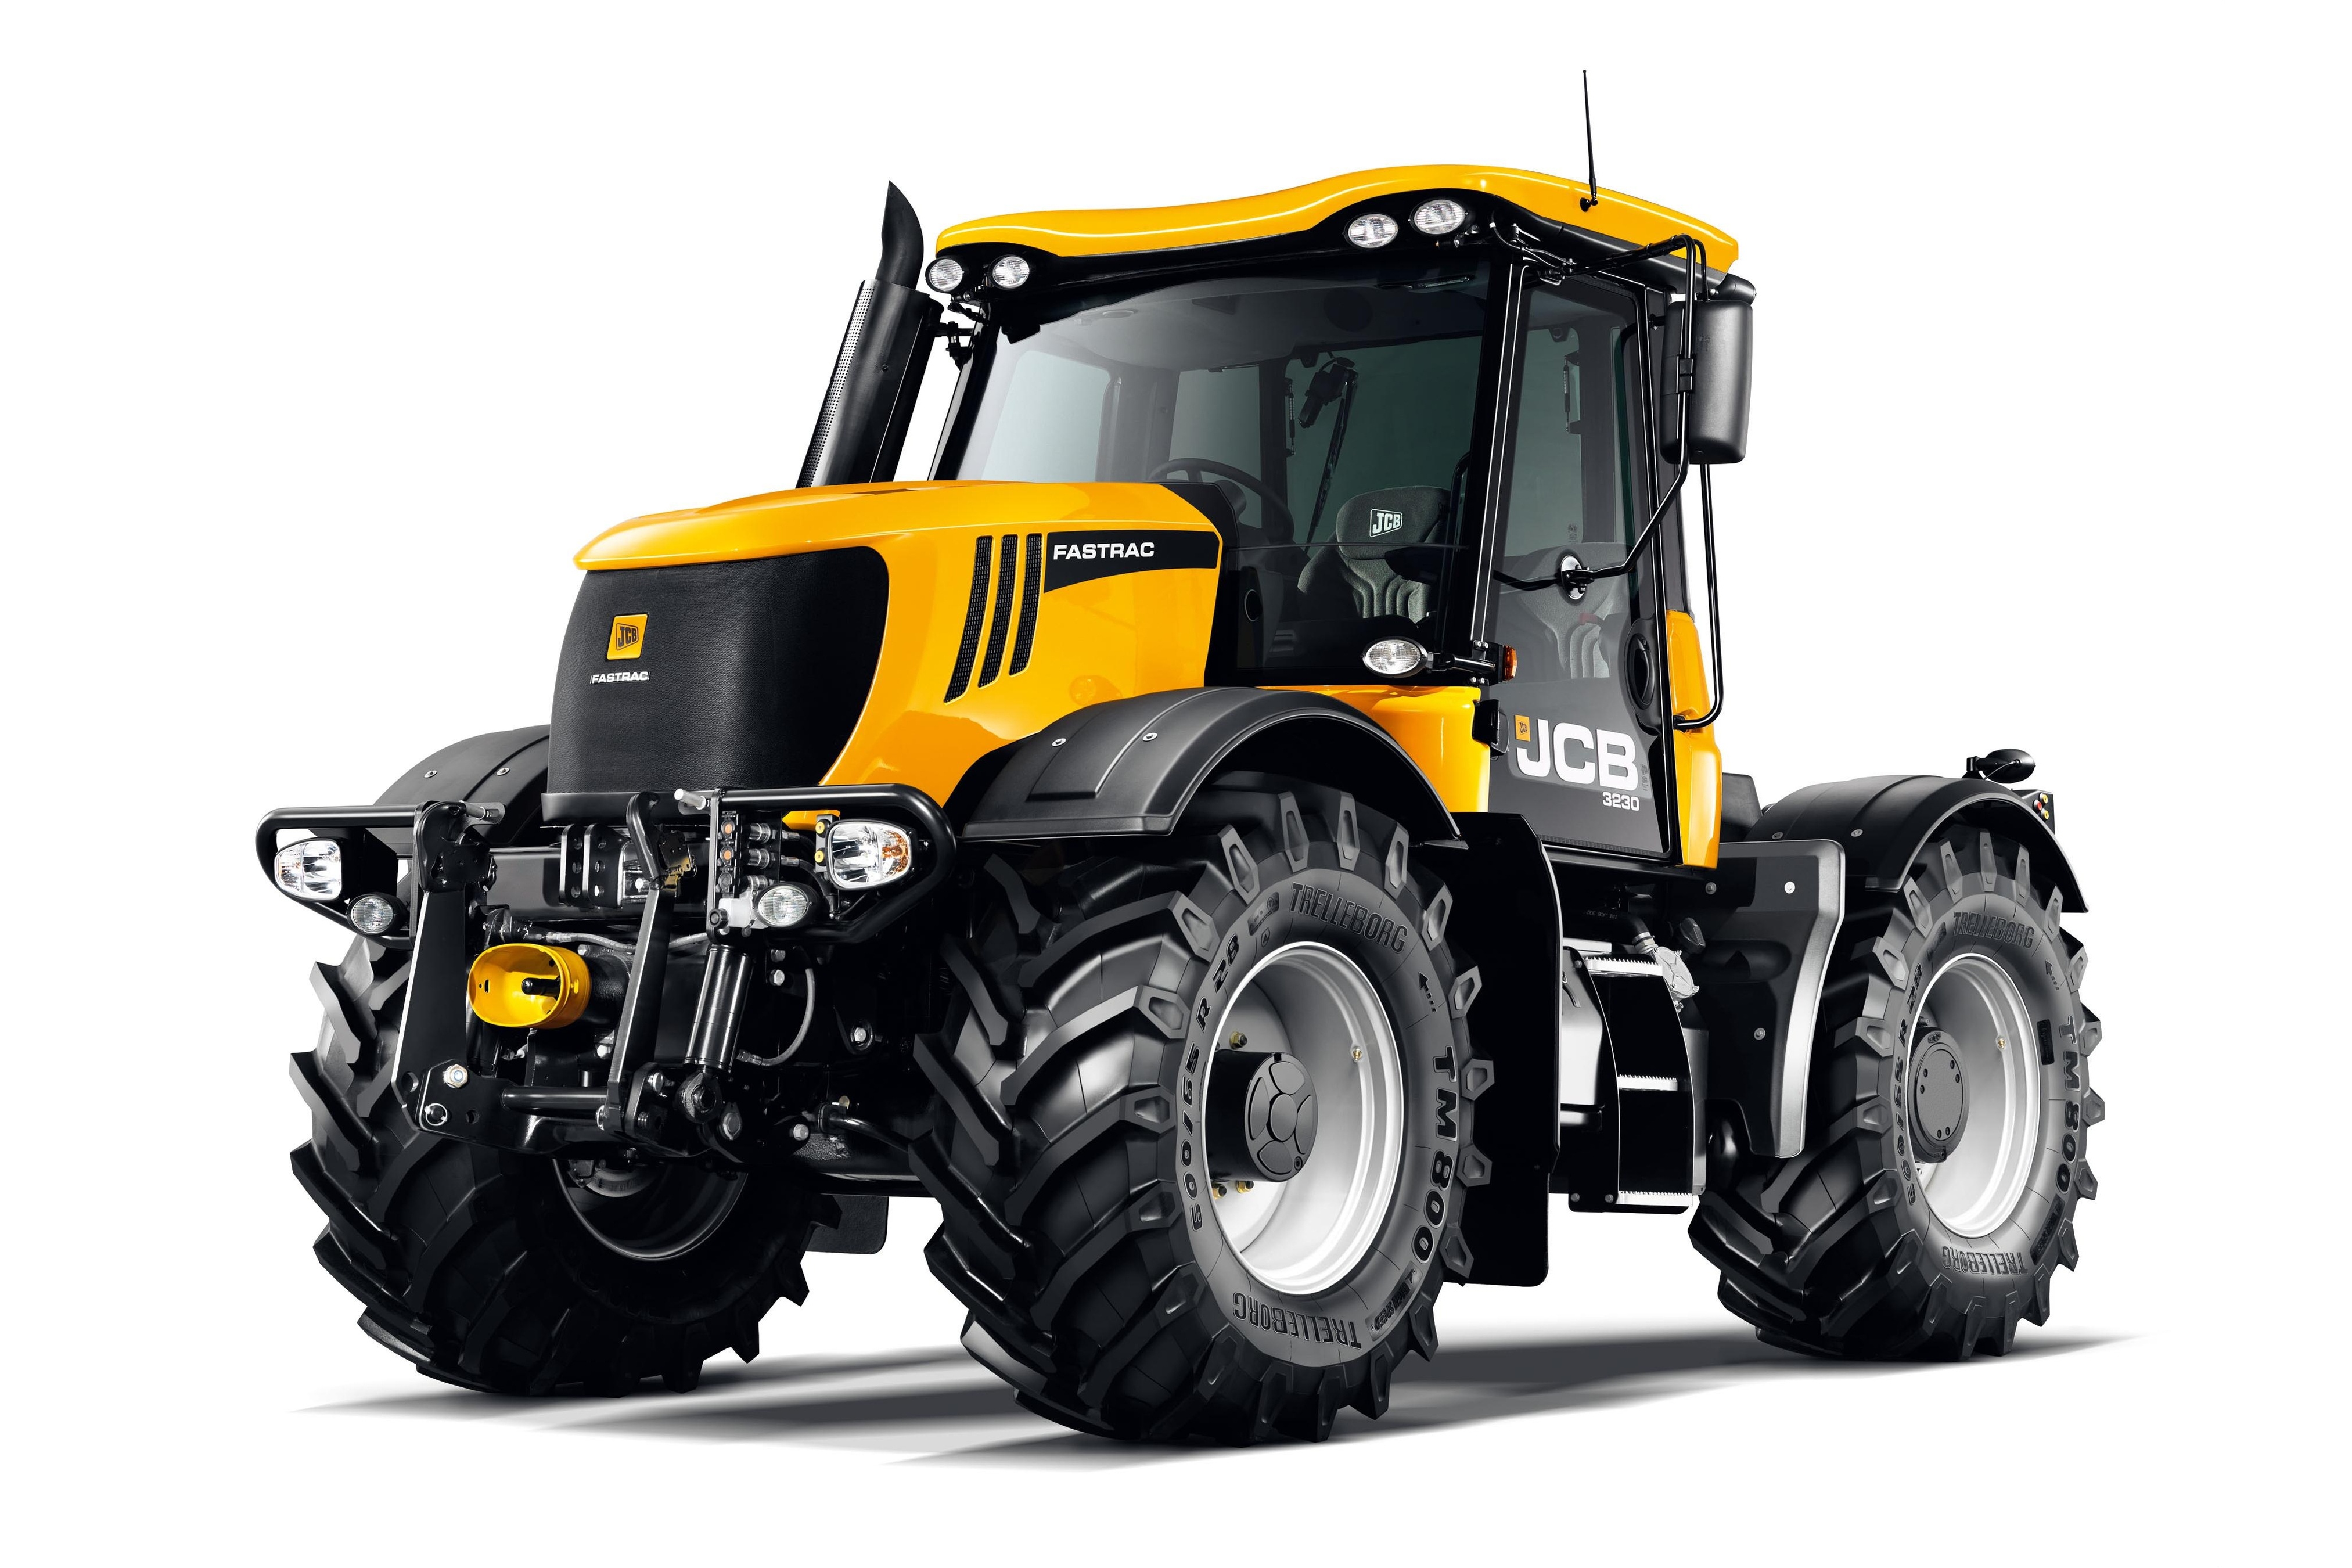 General 4050x2700 tractors vehicle Fastrac 3230 simple background